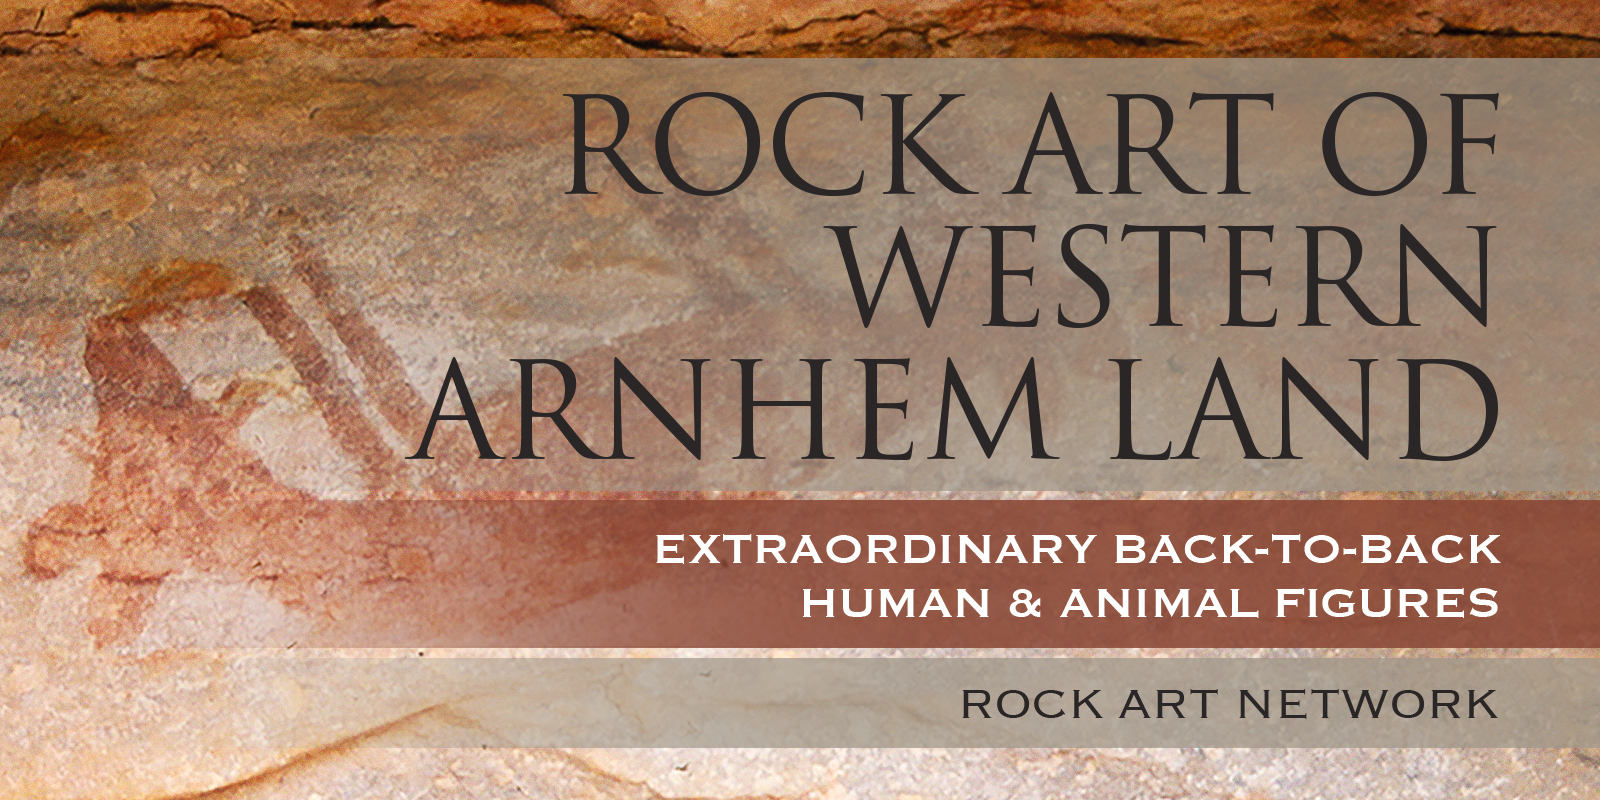 Extraordinary Back-to-Back Human and Animal Figures in the Art of Western Arnhem Land, Australia: One of the World's Largest Assemblages